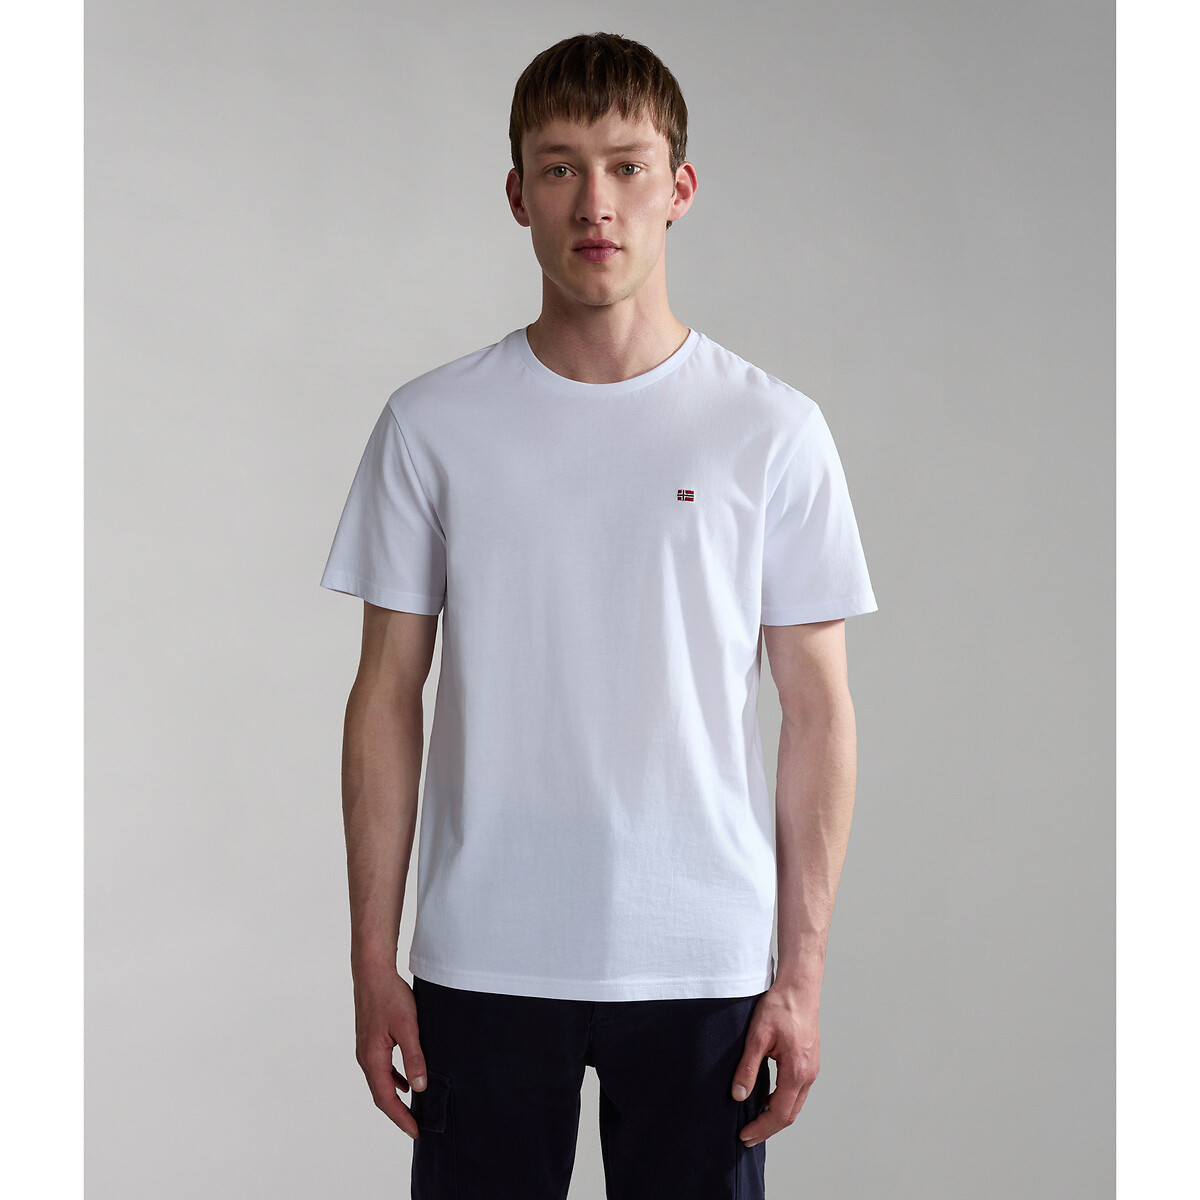 Image of Salis Cotton T-Shirt with Short Sleeves